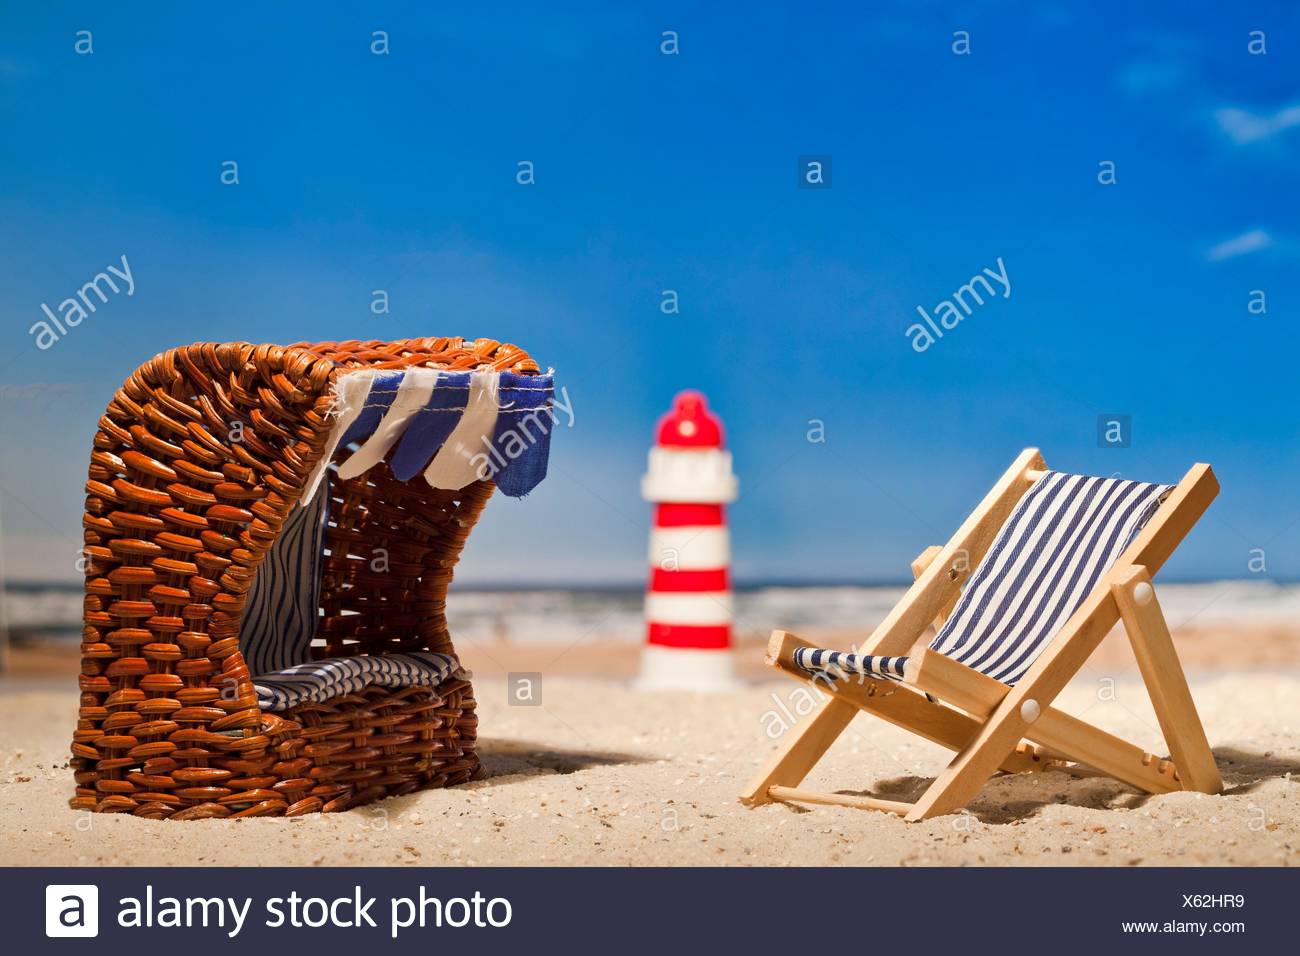 Still Life Of A Miniature Lighthouse Deck Chair And Roofed Wicker